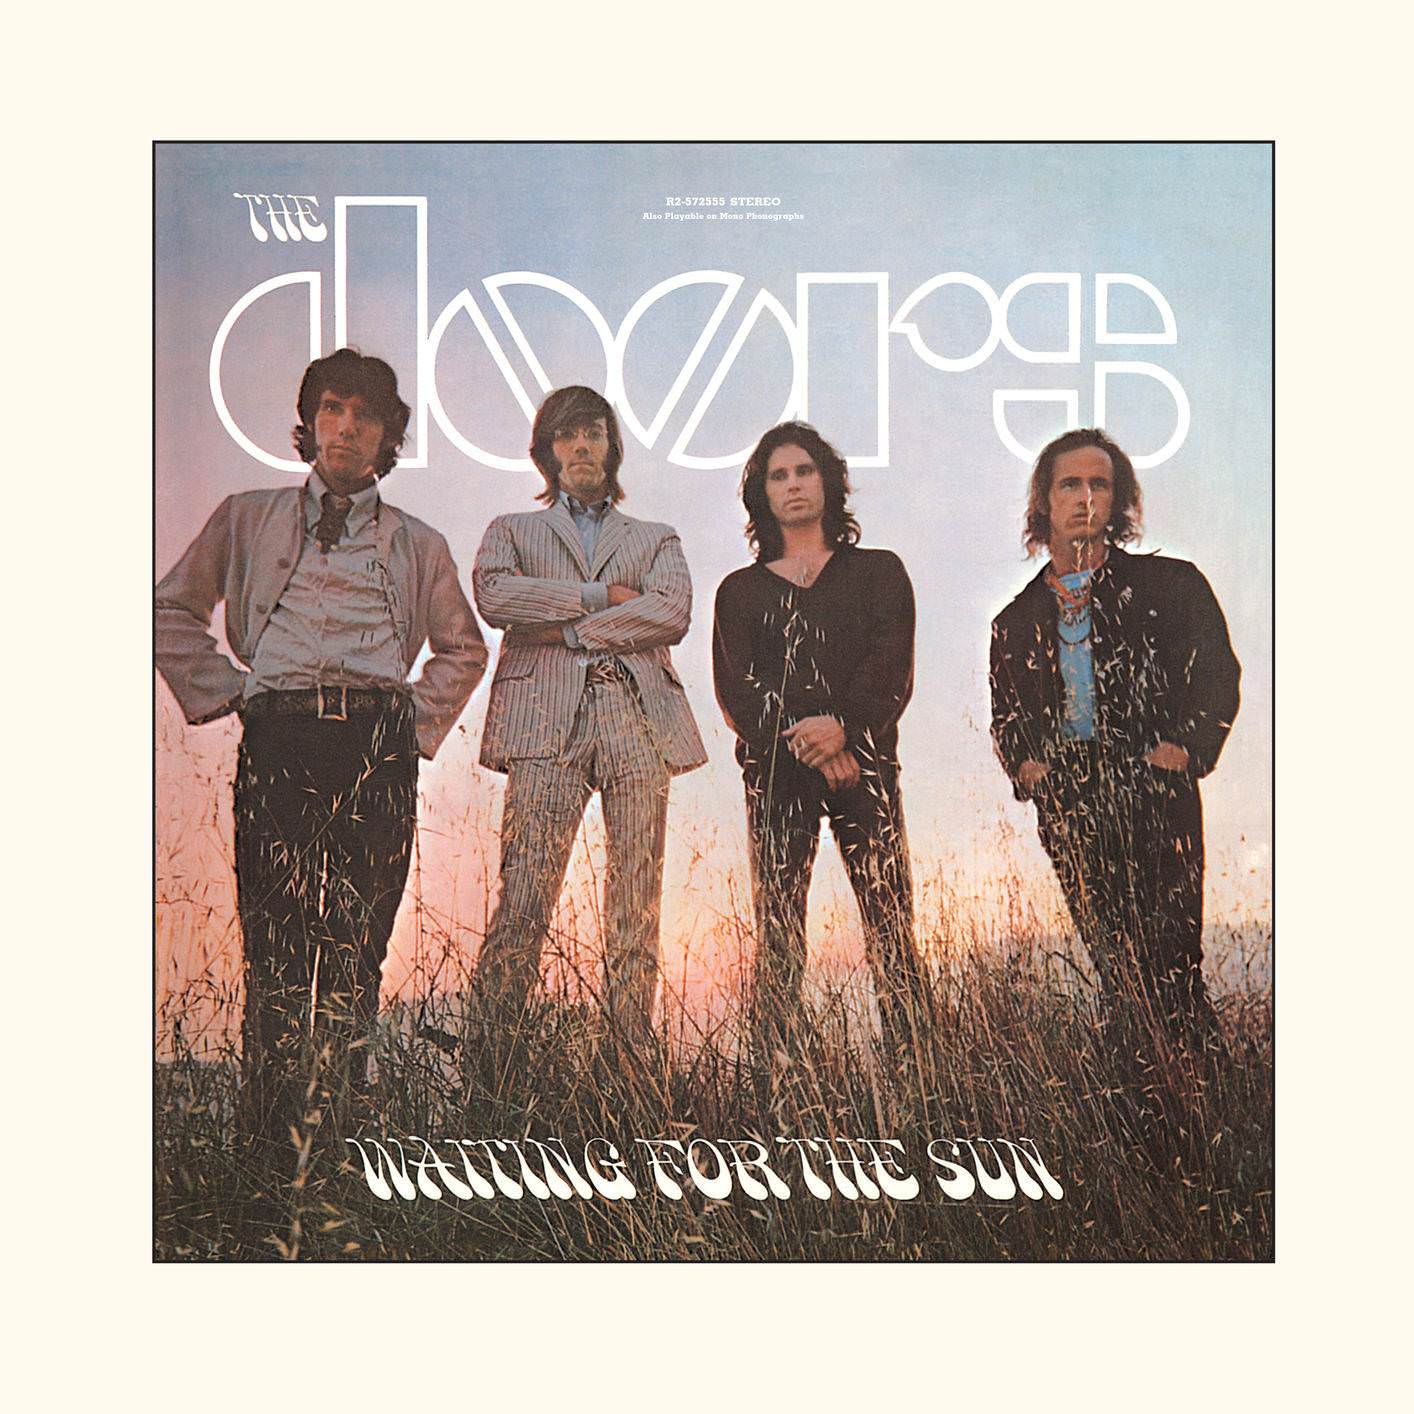 The Doors - Waiting For The Sun (50th Anniversary Deluxe Edition) (1968/2018) [FLAC 24bit/192kHz]